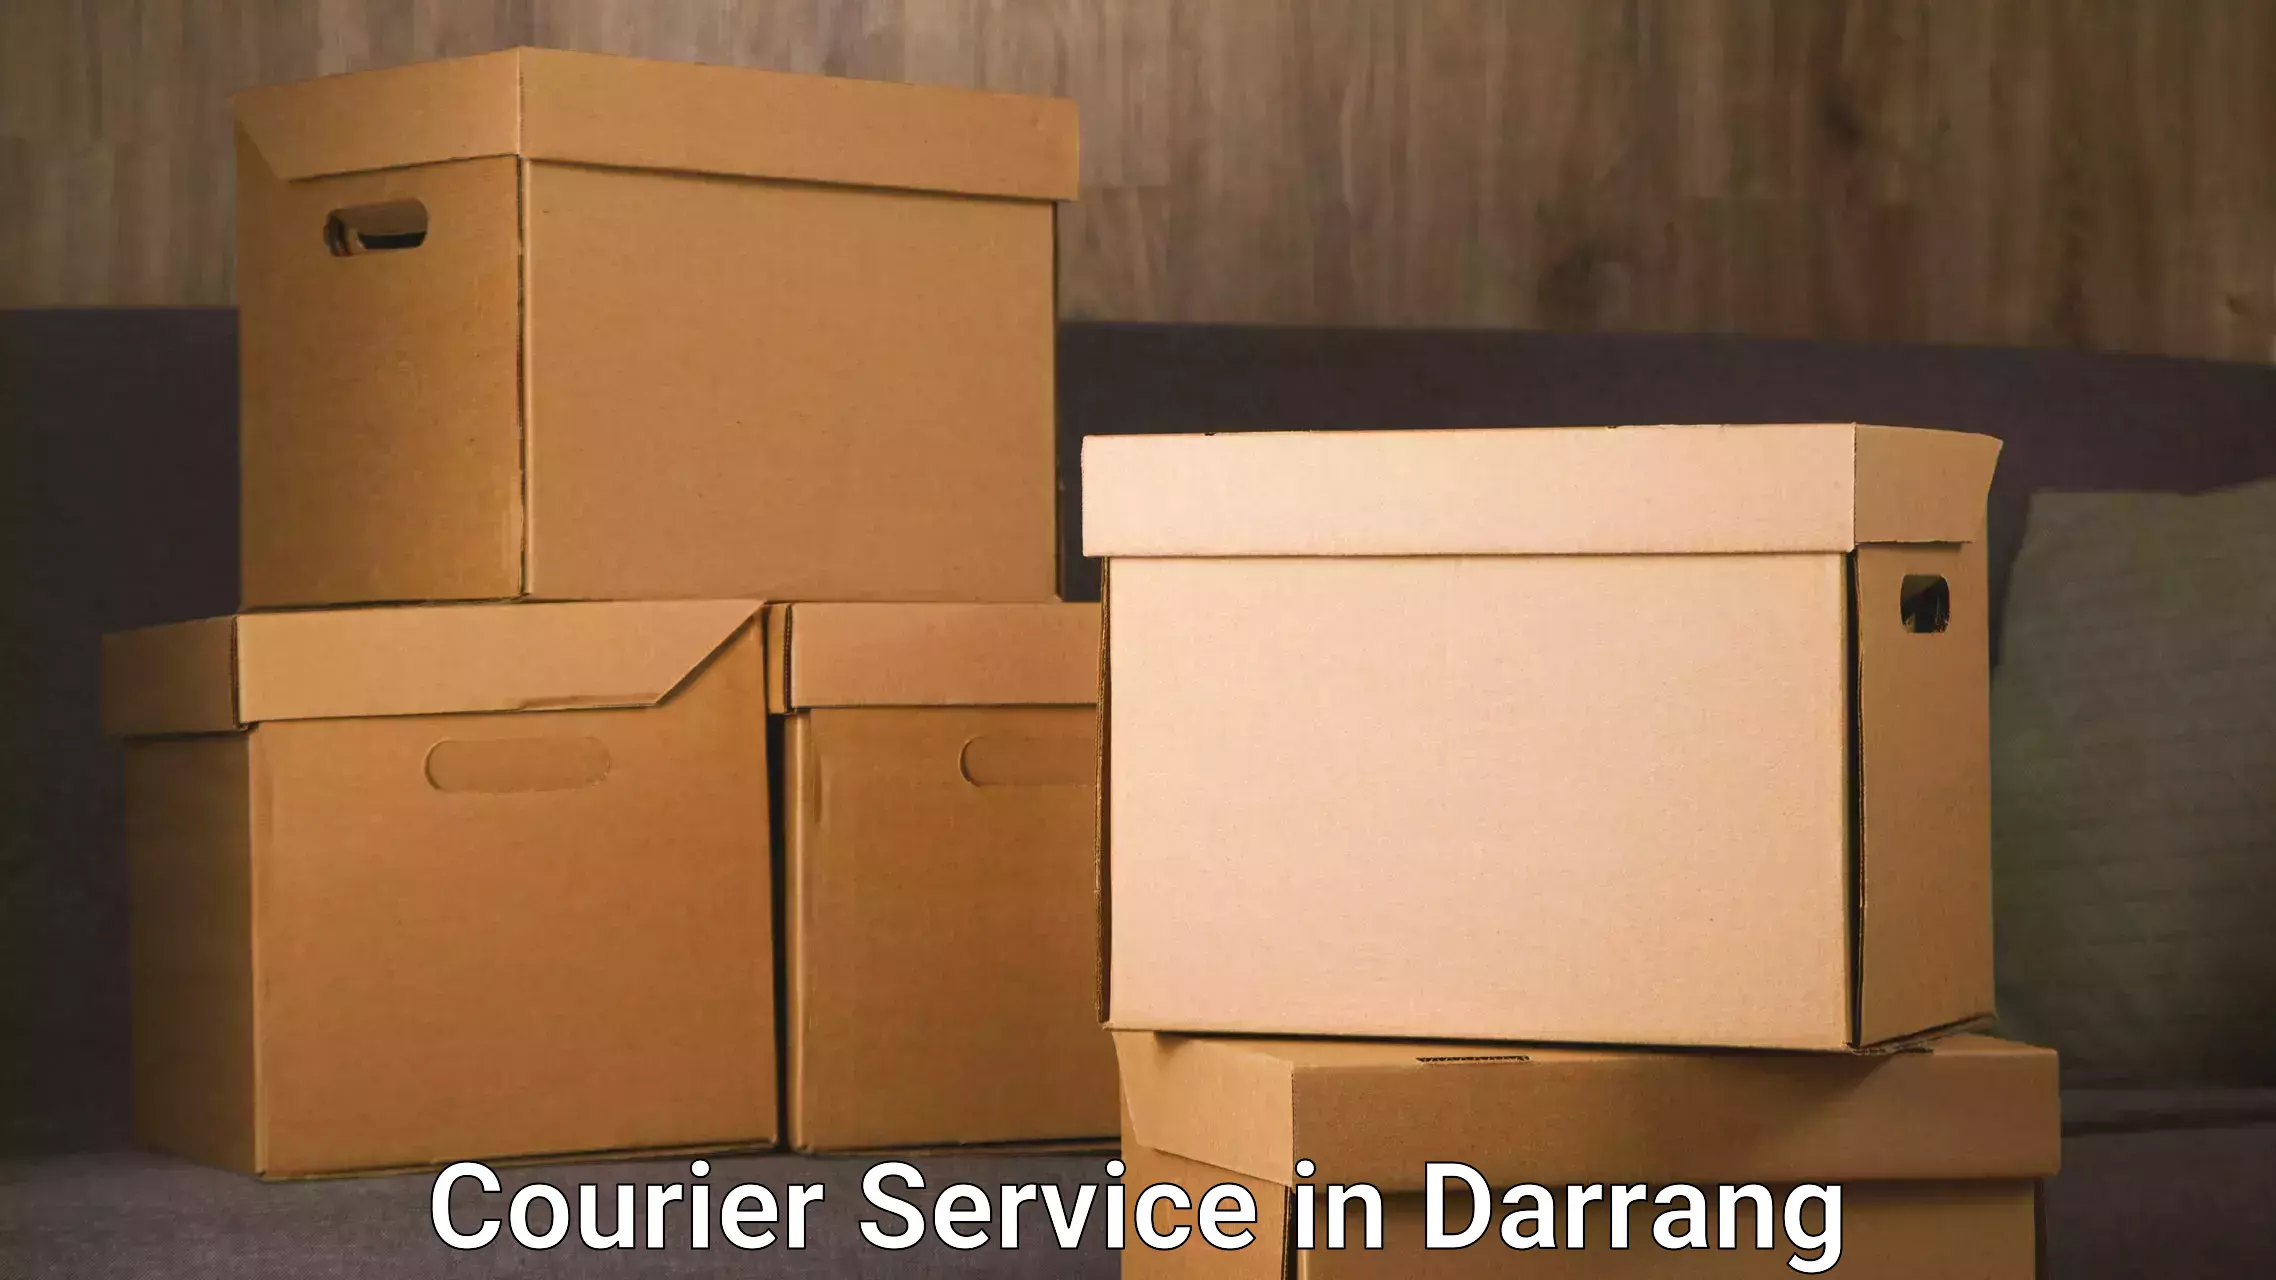 Enhanced delivery experience in Darrang